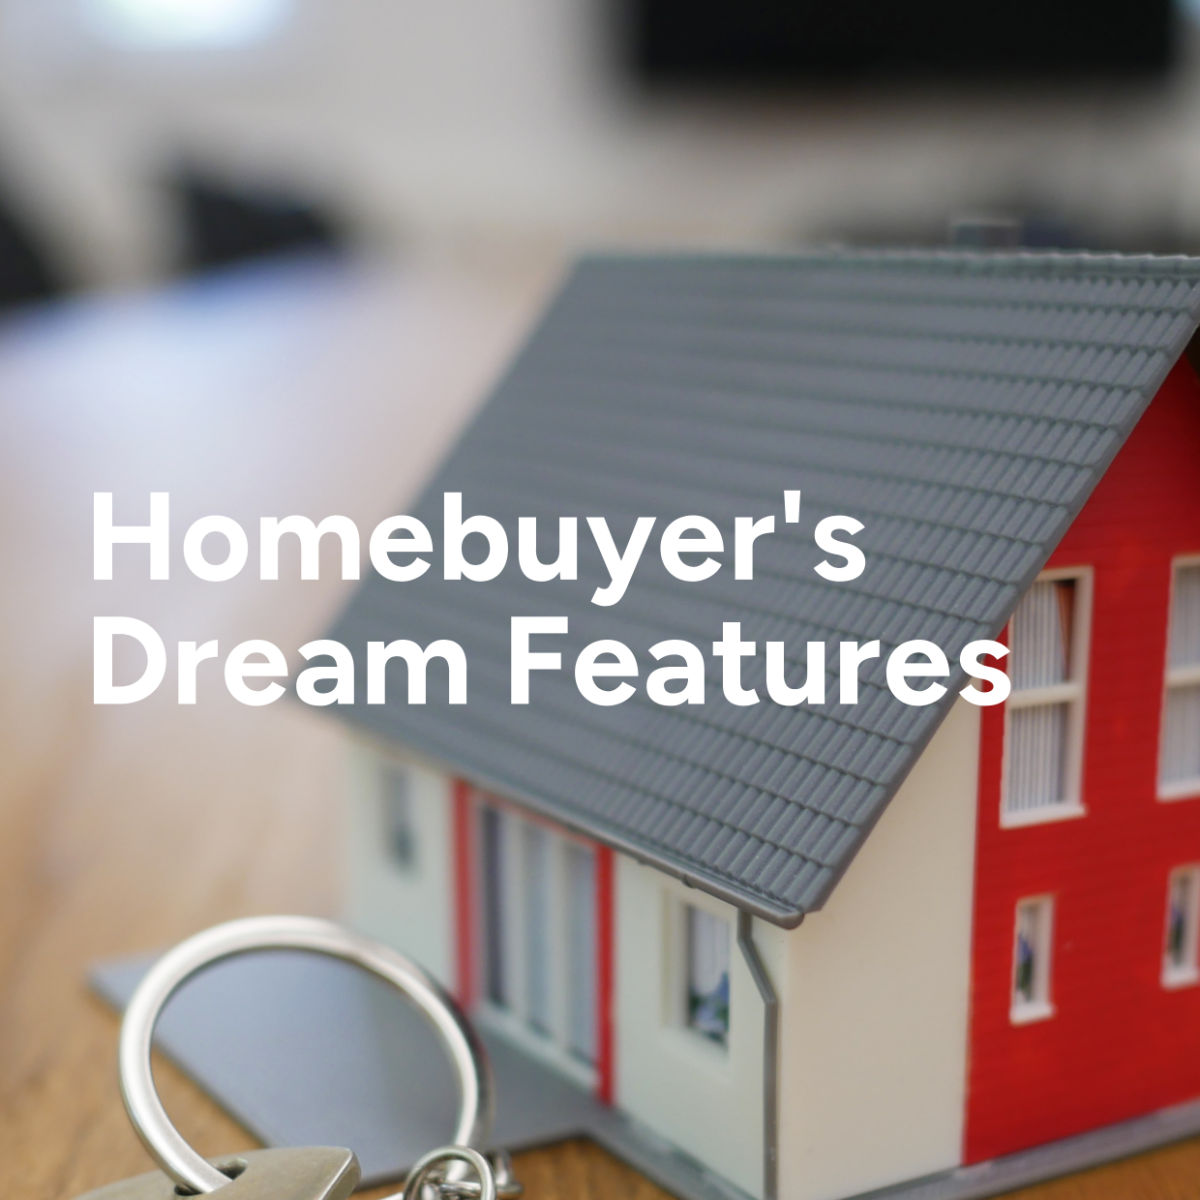 Home Buying Wish List Template